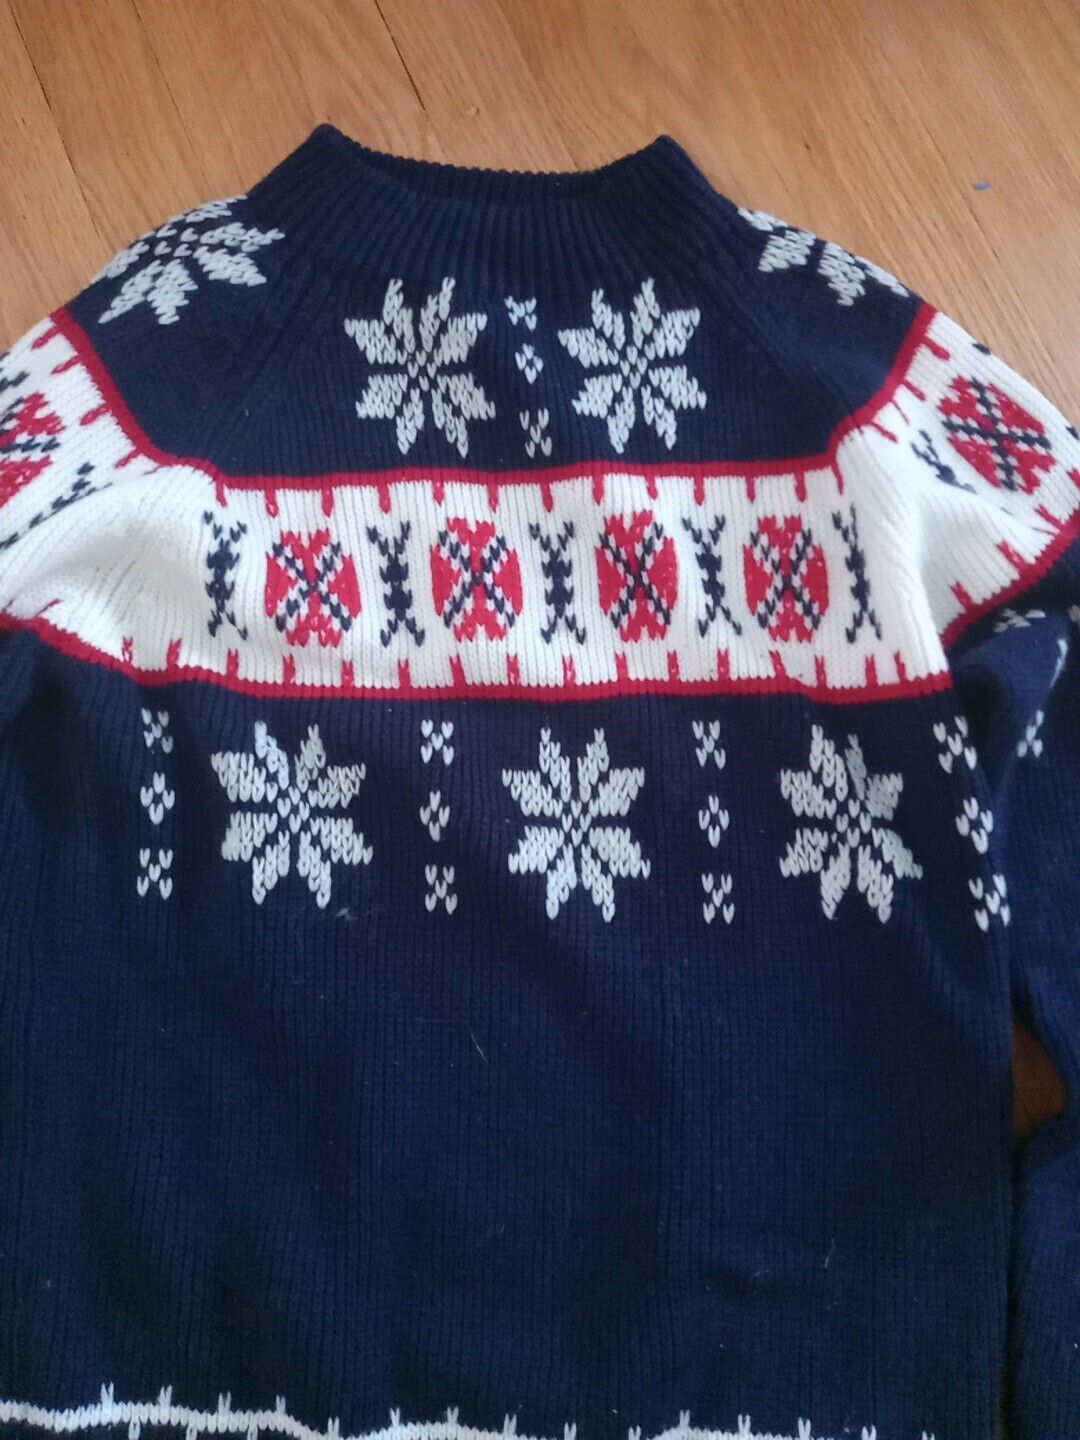 Jc Penney Sweater Snowflakes Red White Blue Vinta… - image 2